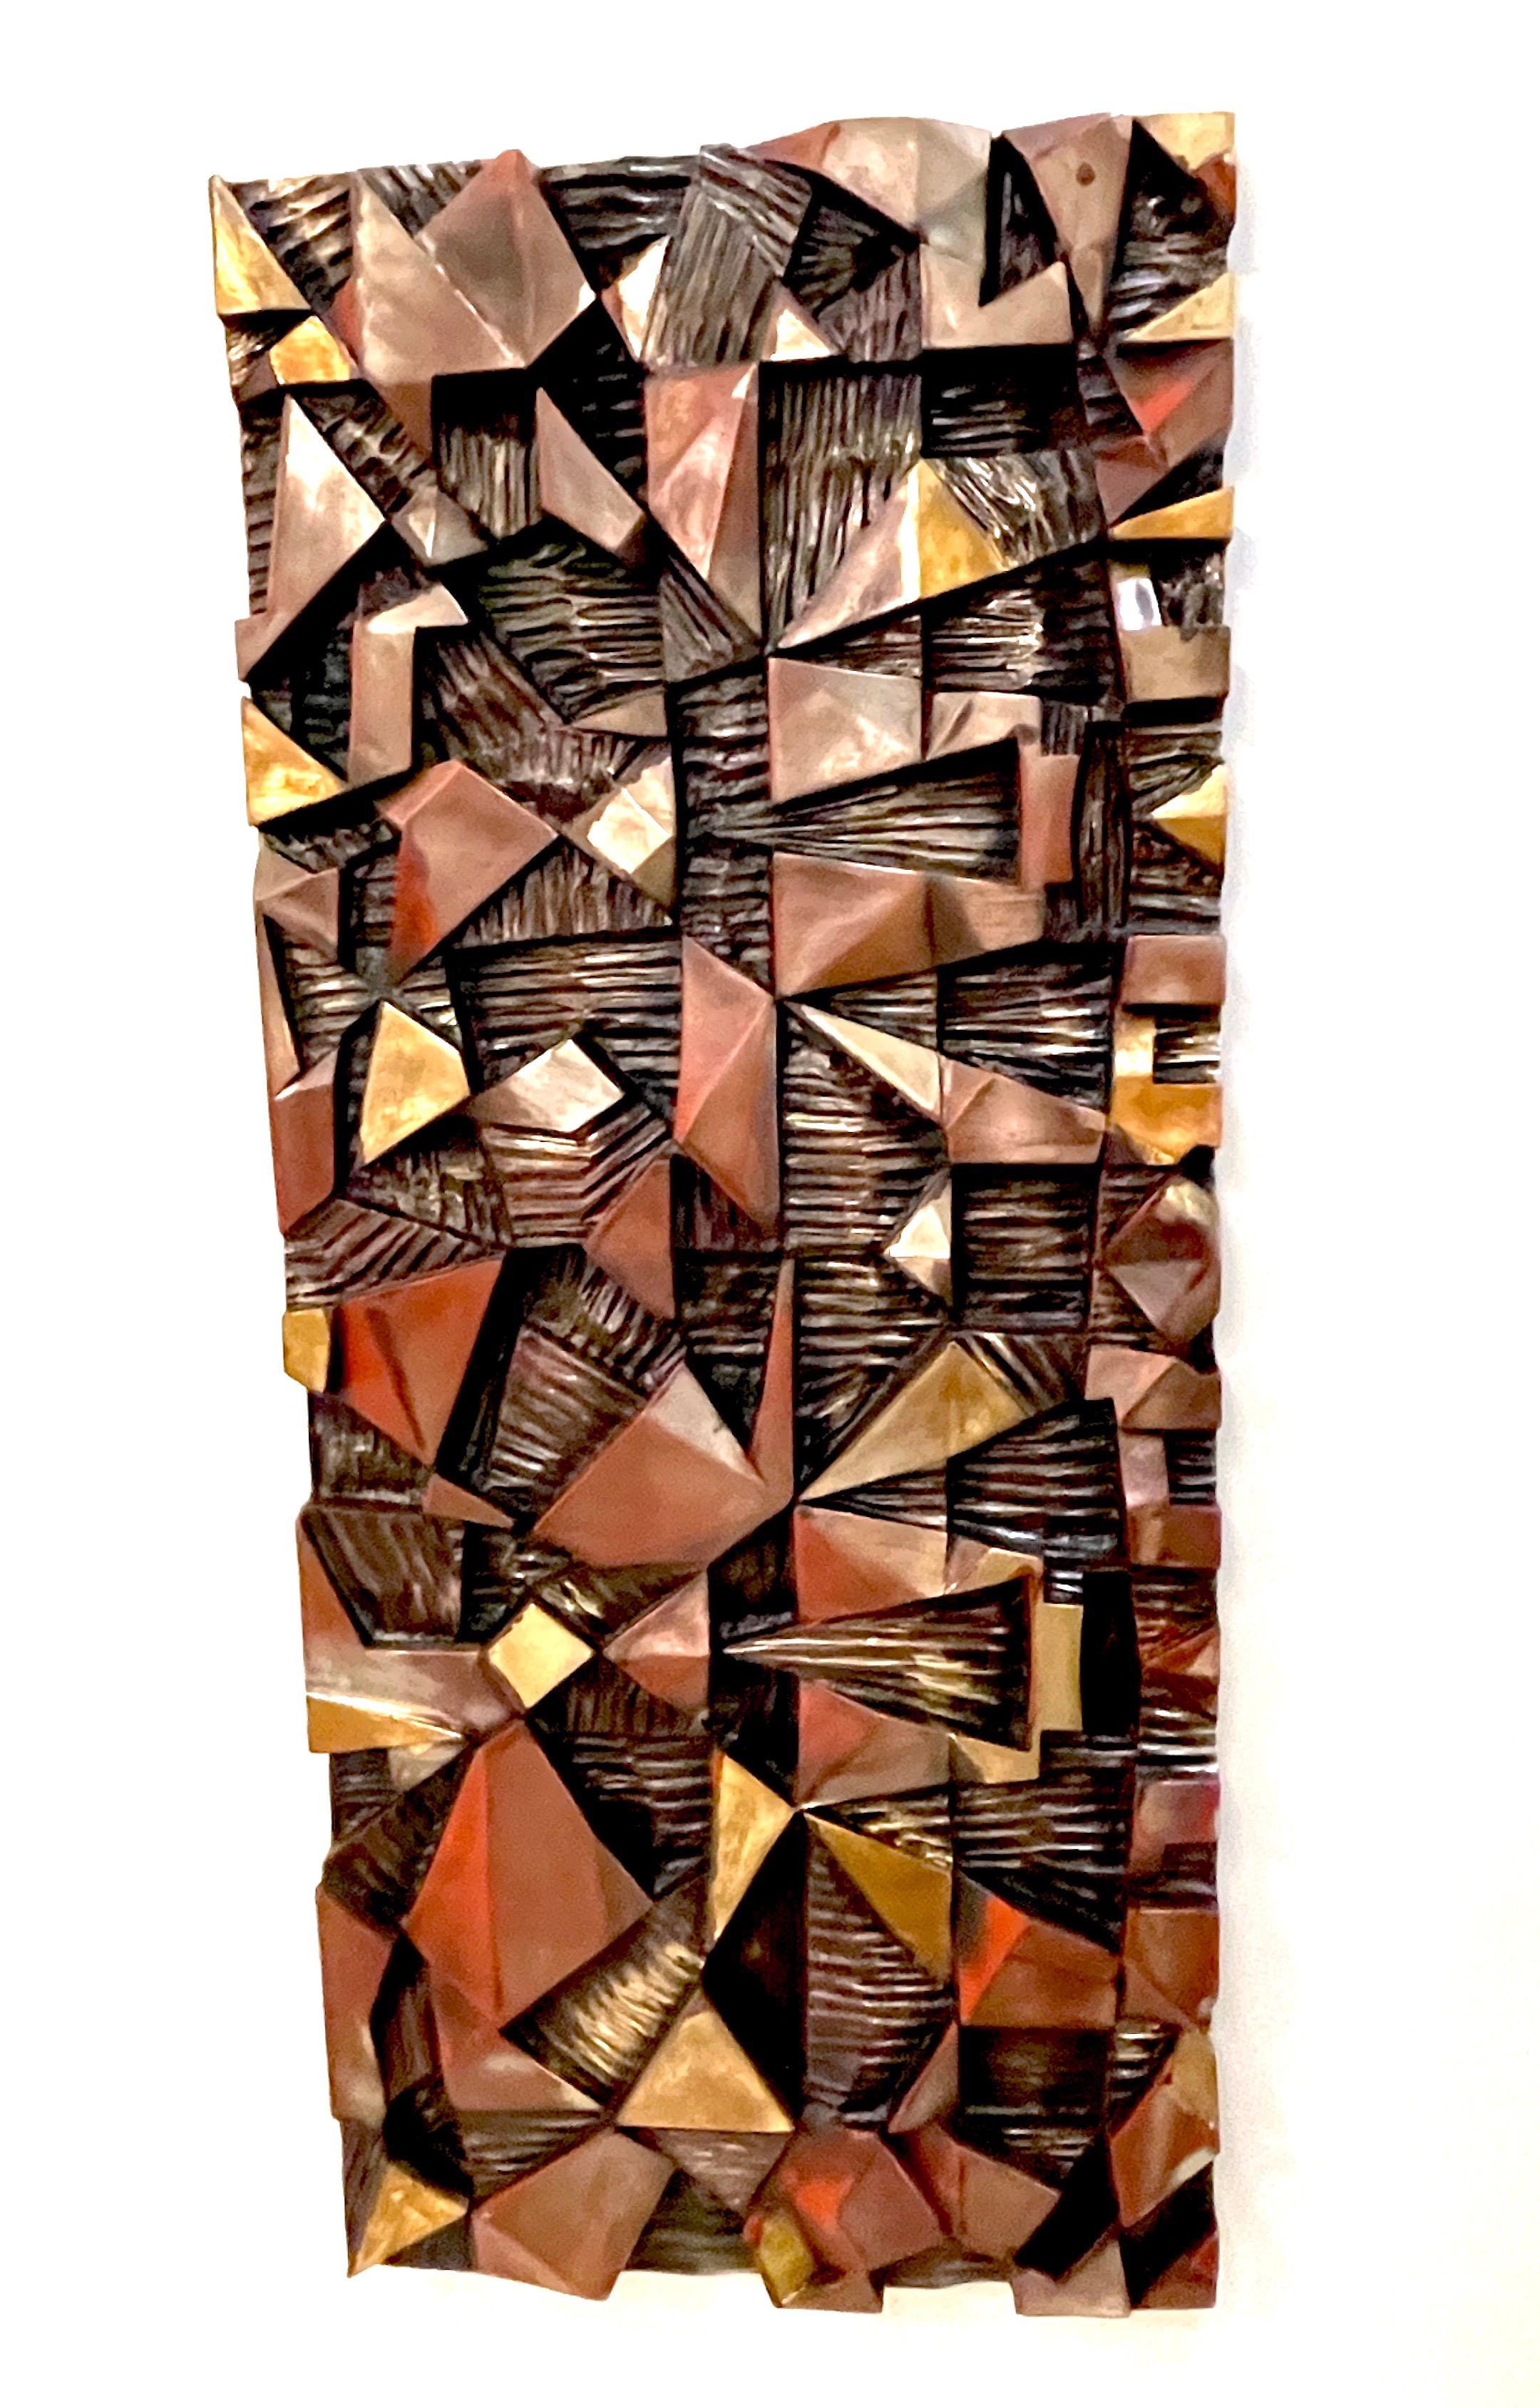 Large Polychromed / Lacquered Fiberglass Brutalist Wall Sculpture 
Can be hung vertically or horizontally 

An impressive work, realistically cast and modeled, to look like bronze, expertly lacquered with gilt and polychrome lacquer. Design